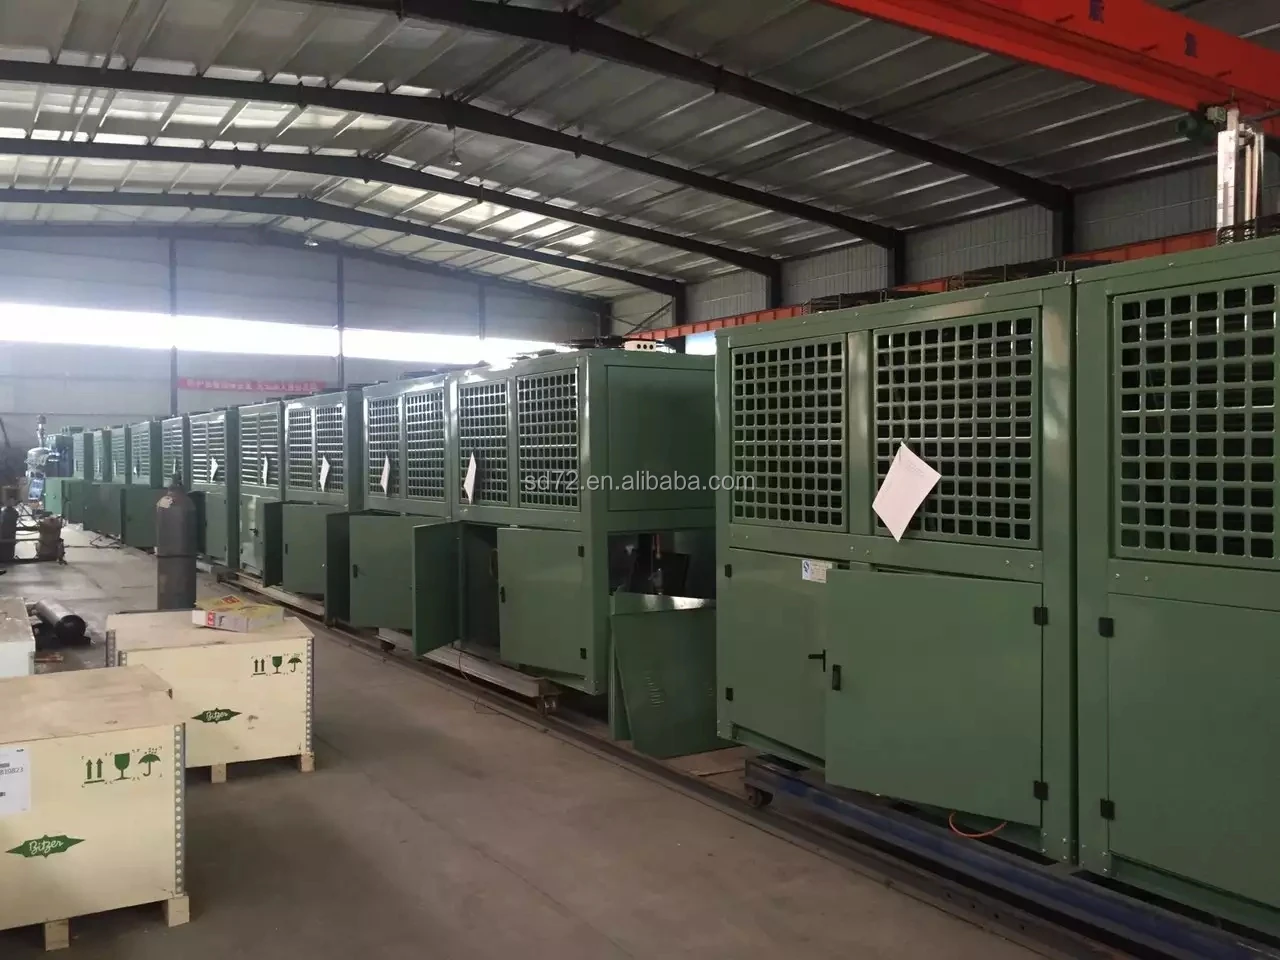 Shandong 72 degree evaporative air cooler cold rooms commercial walk in cold room for seafood